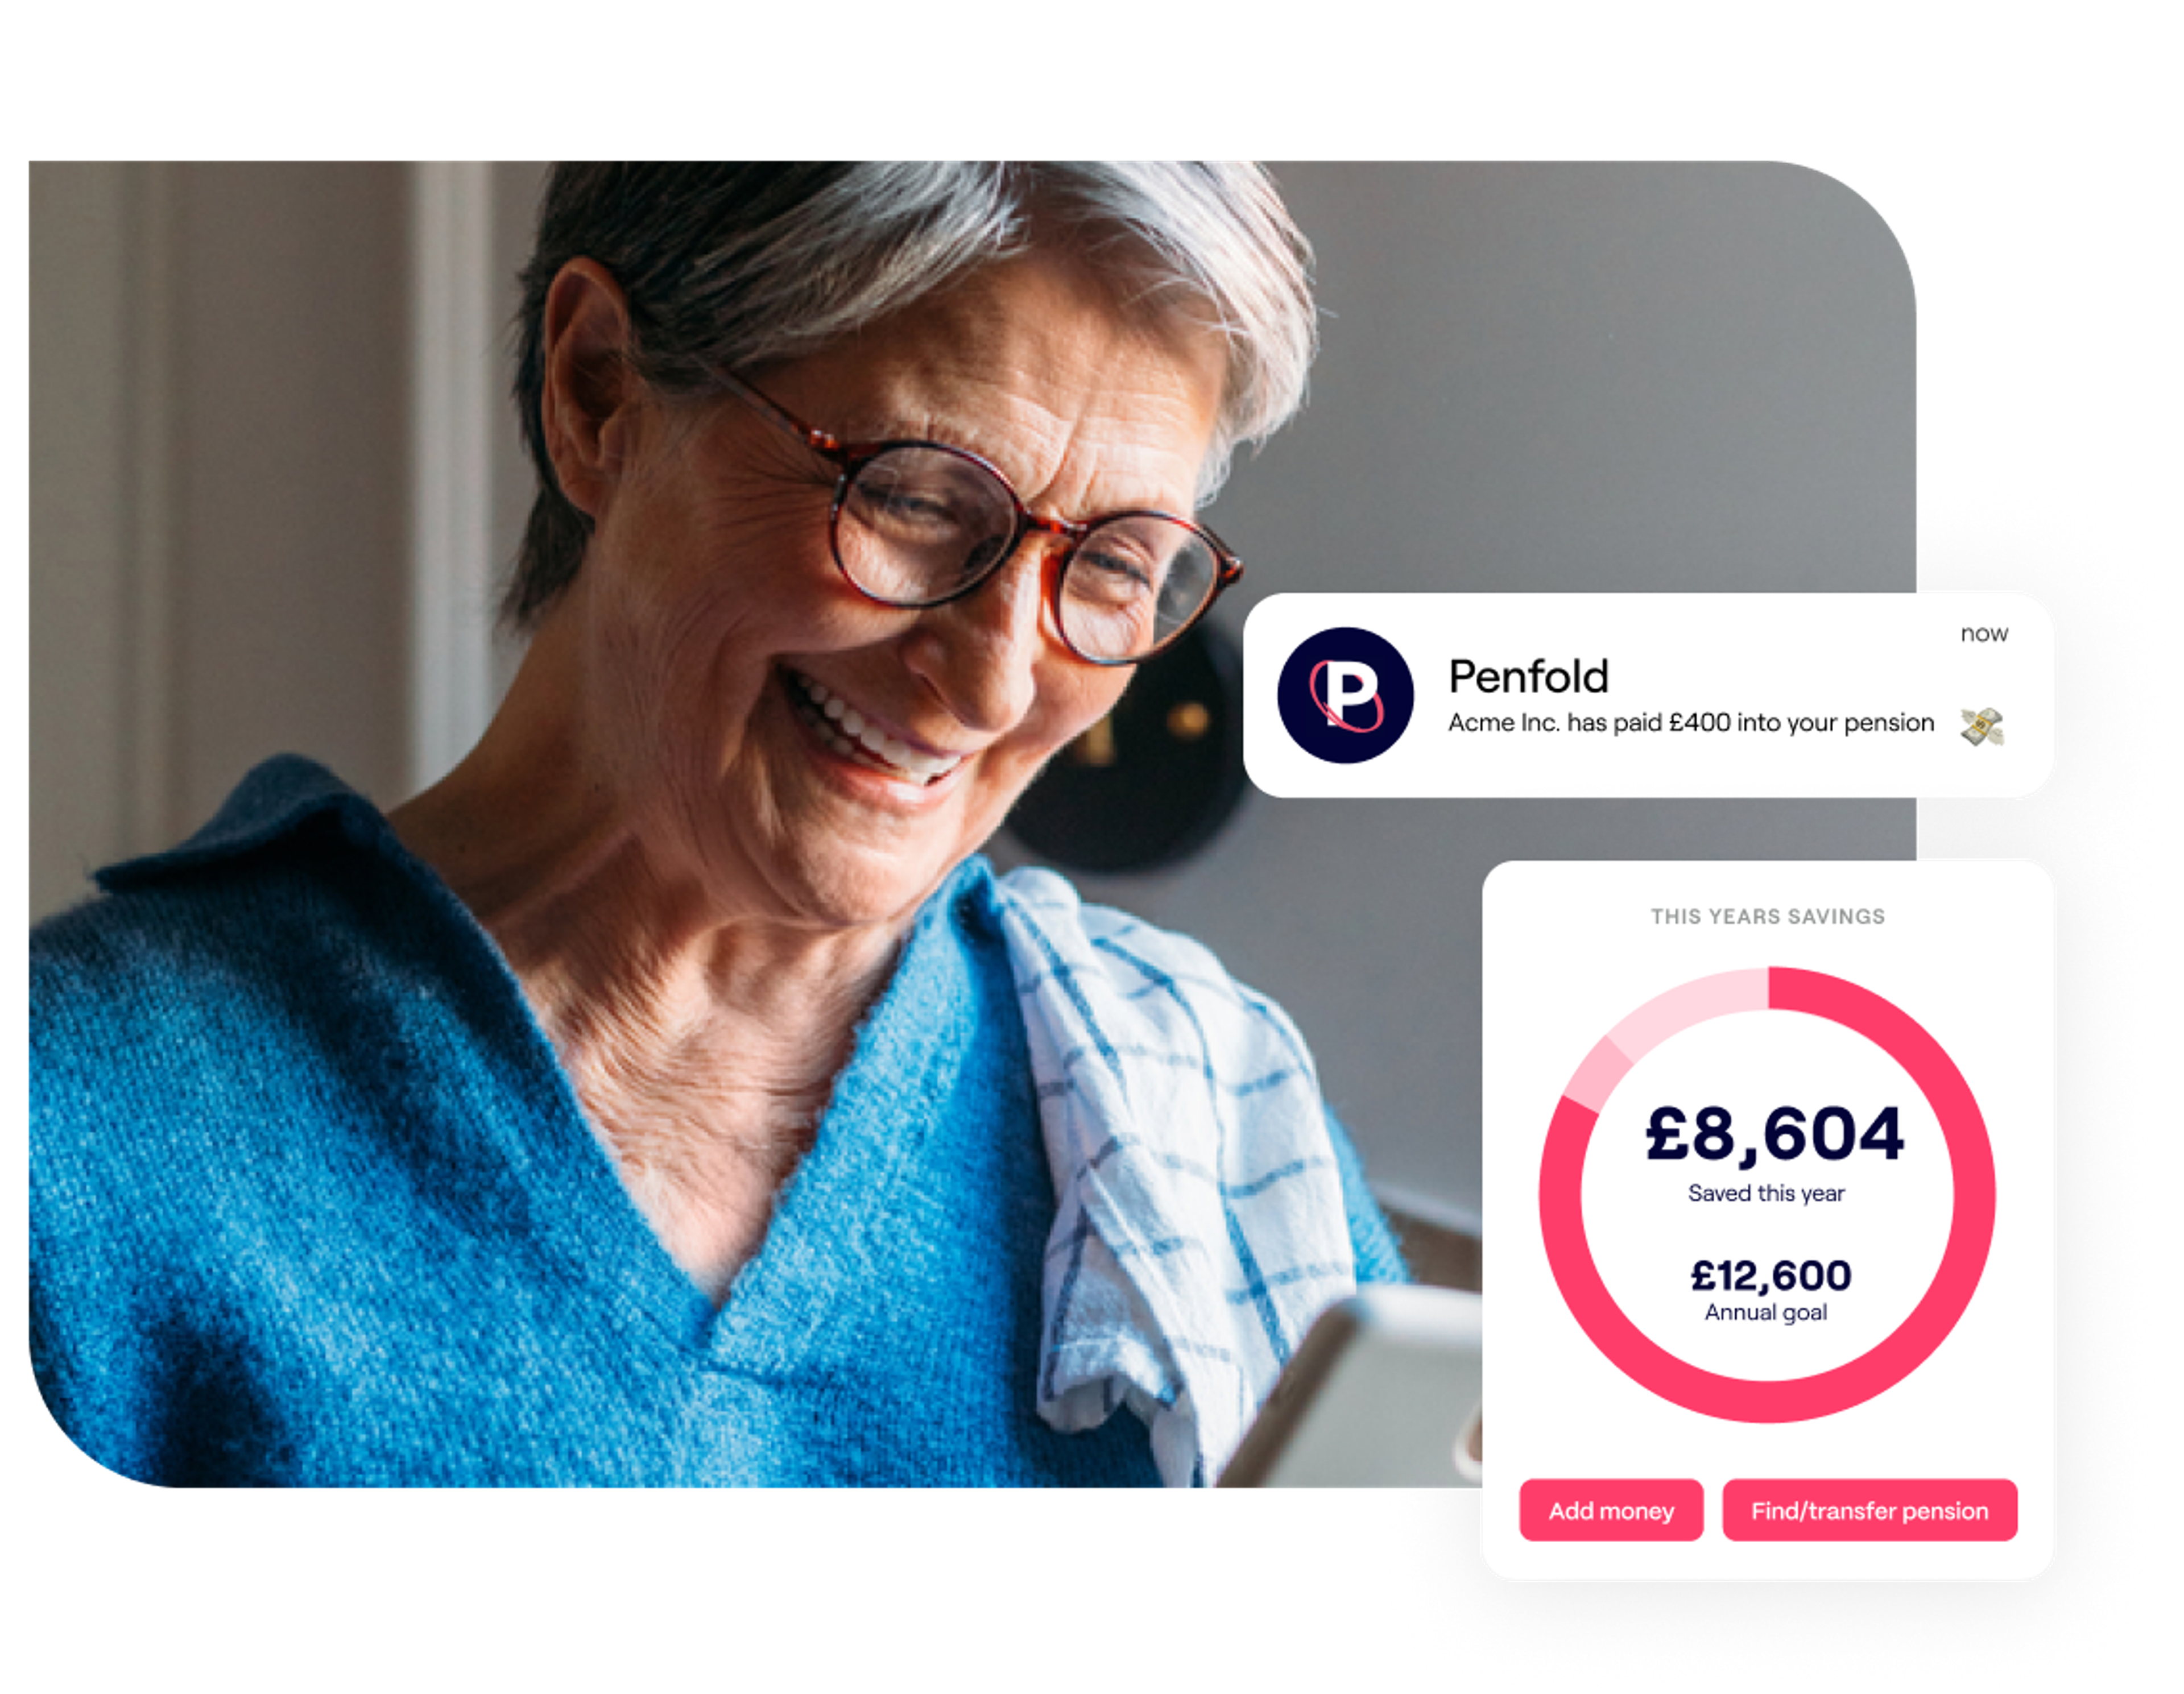 A photo of a woman smiling while looking at a laptop and excerpts of the Penfold pension app showing retirement savings and pension contributions screens